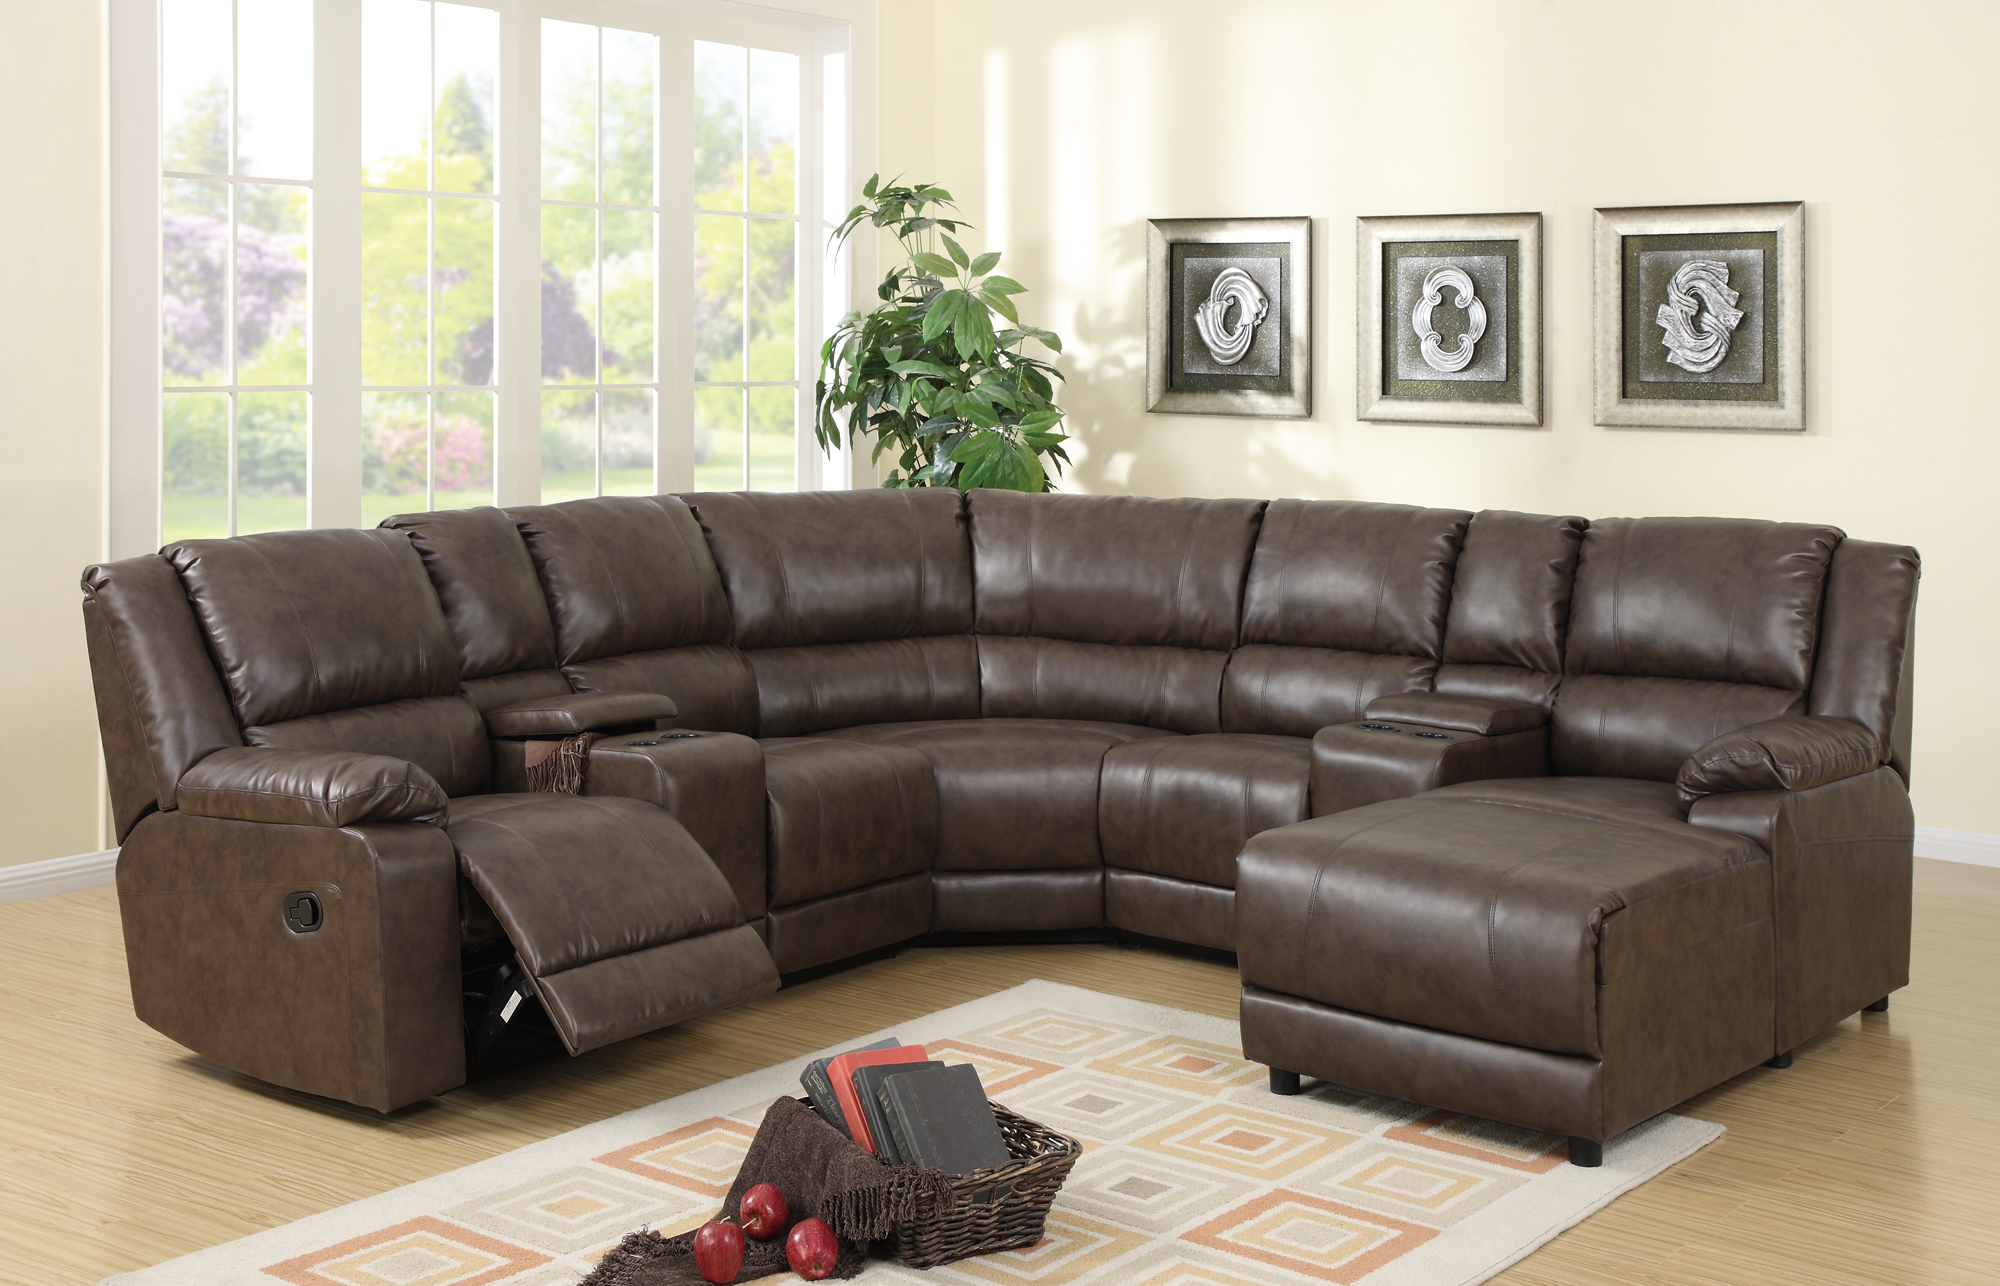 F6702 4 Pc Reclining Sectional Set Light Coffee PG. 66